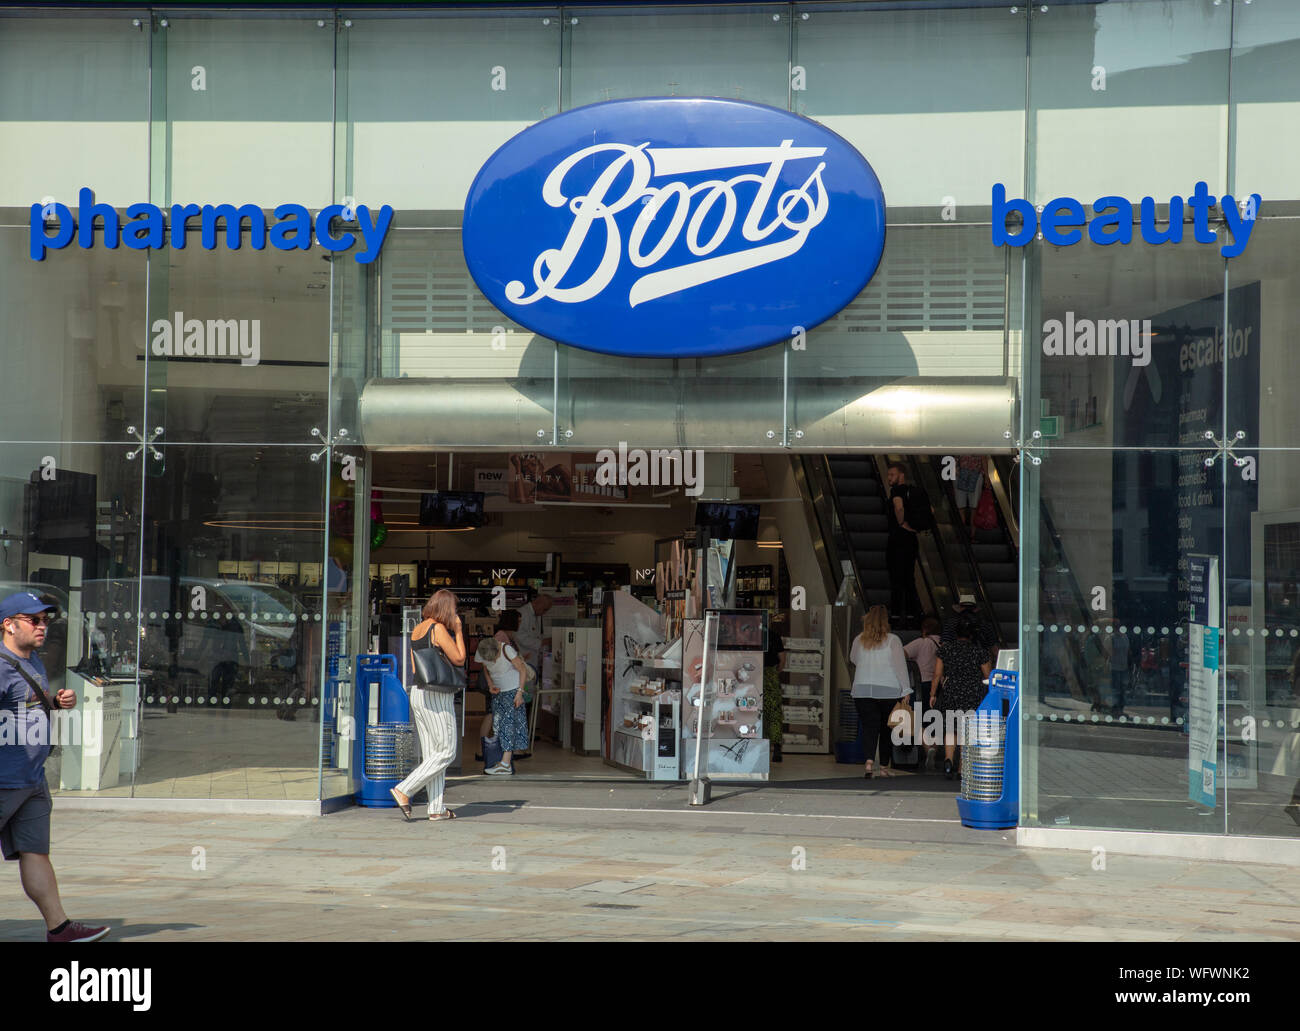 Shop front of Boots pharmacy and beauty in London Stock Photo - Alamy